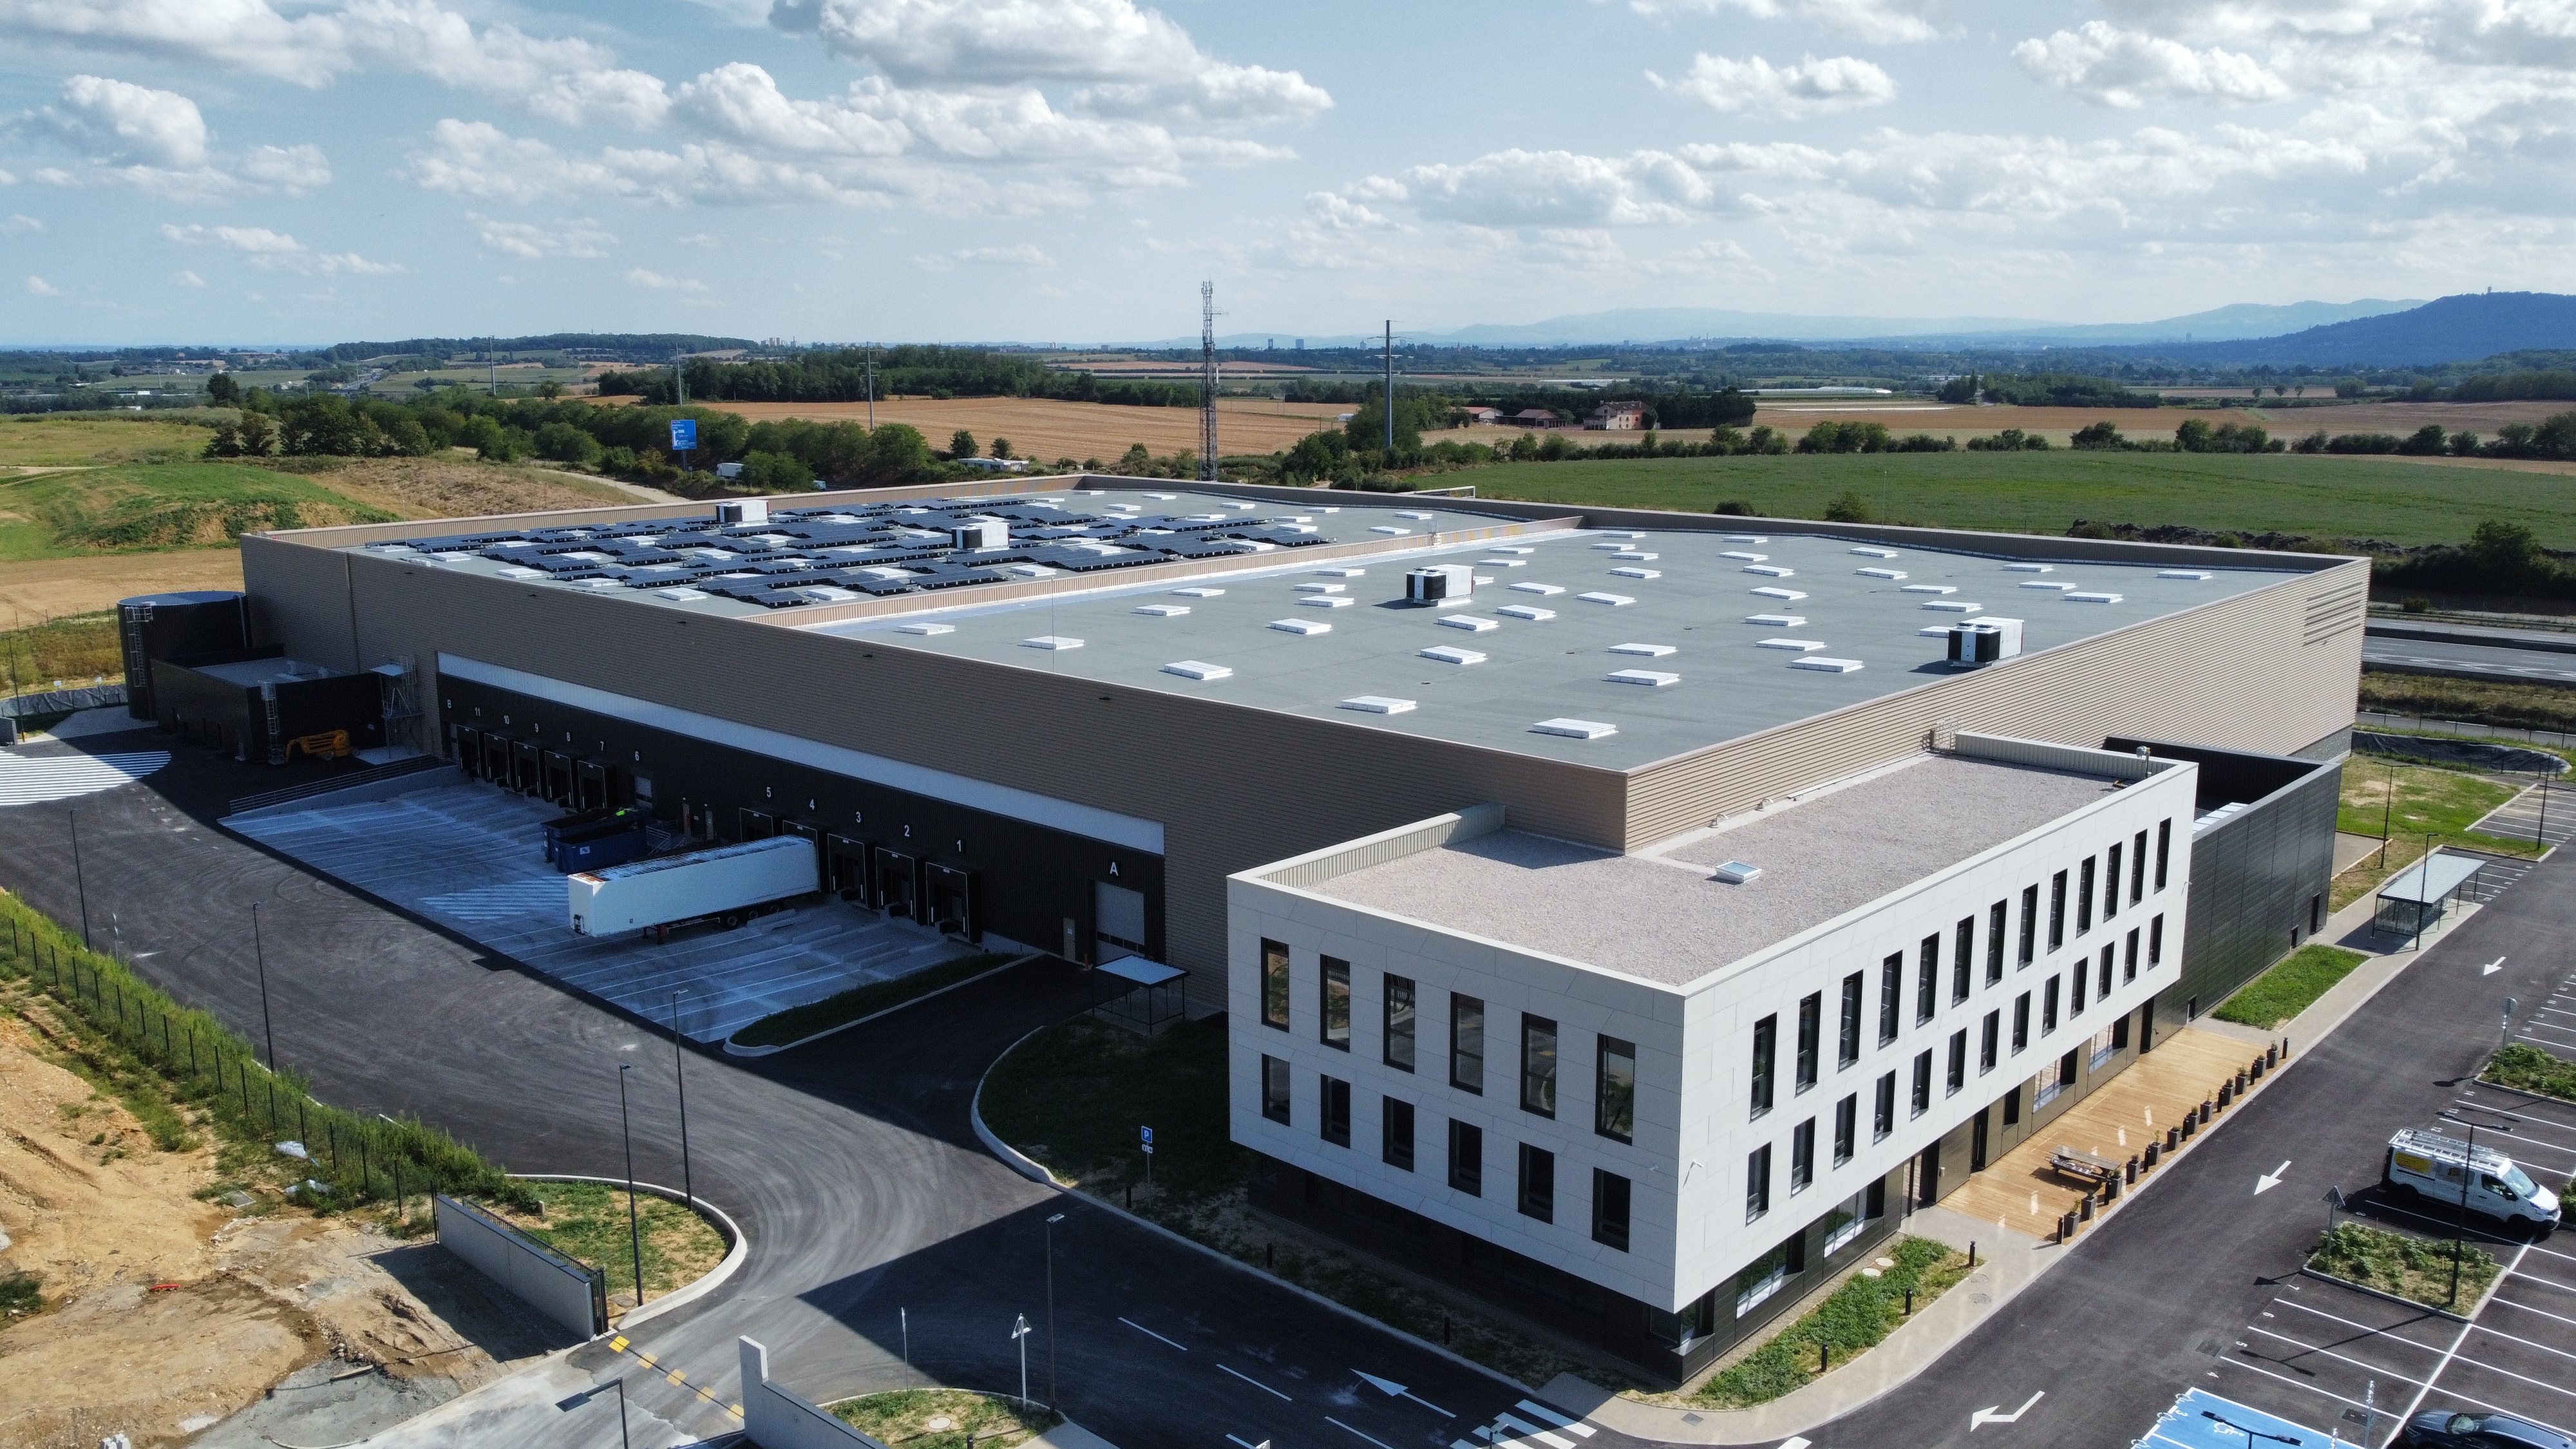 New premises, interview with Richard Crnjanski, Supply chain and IT Director